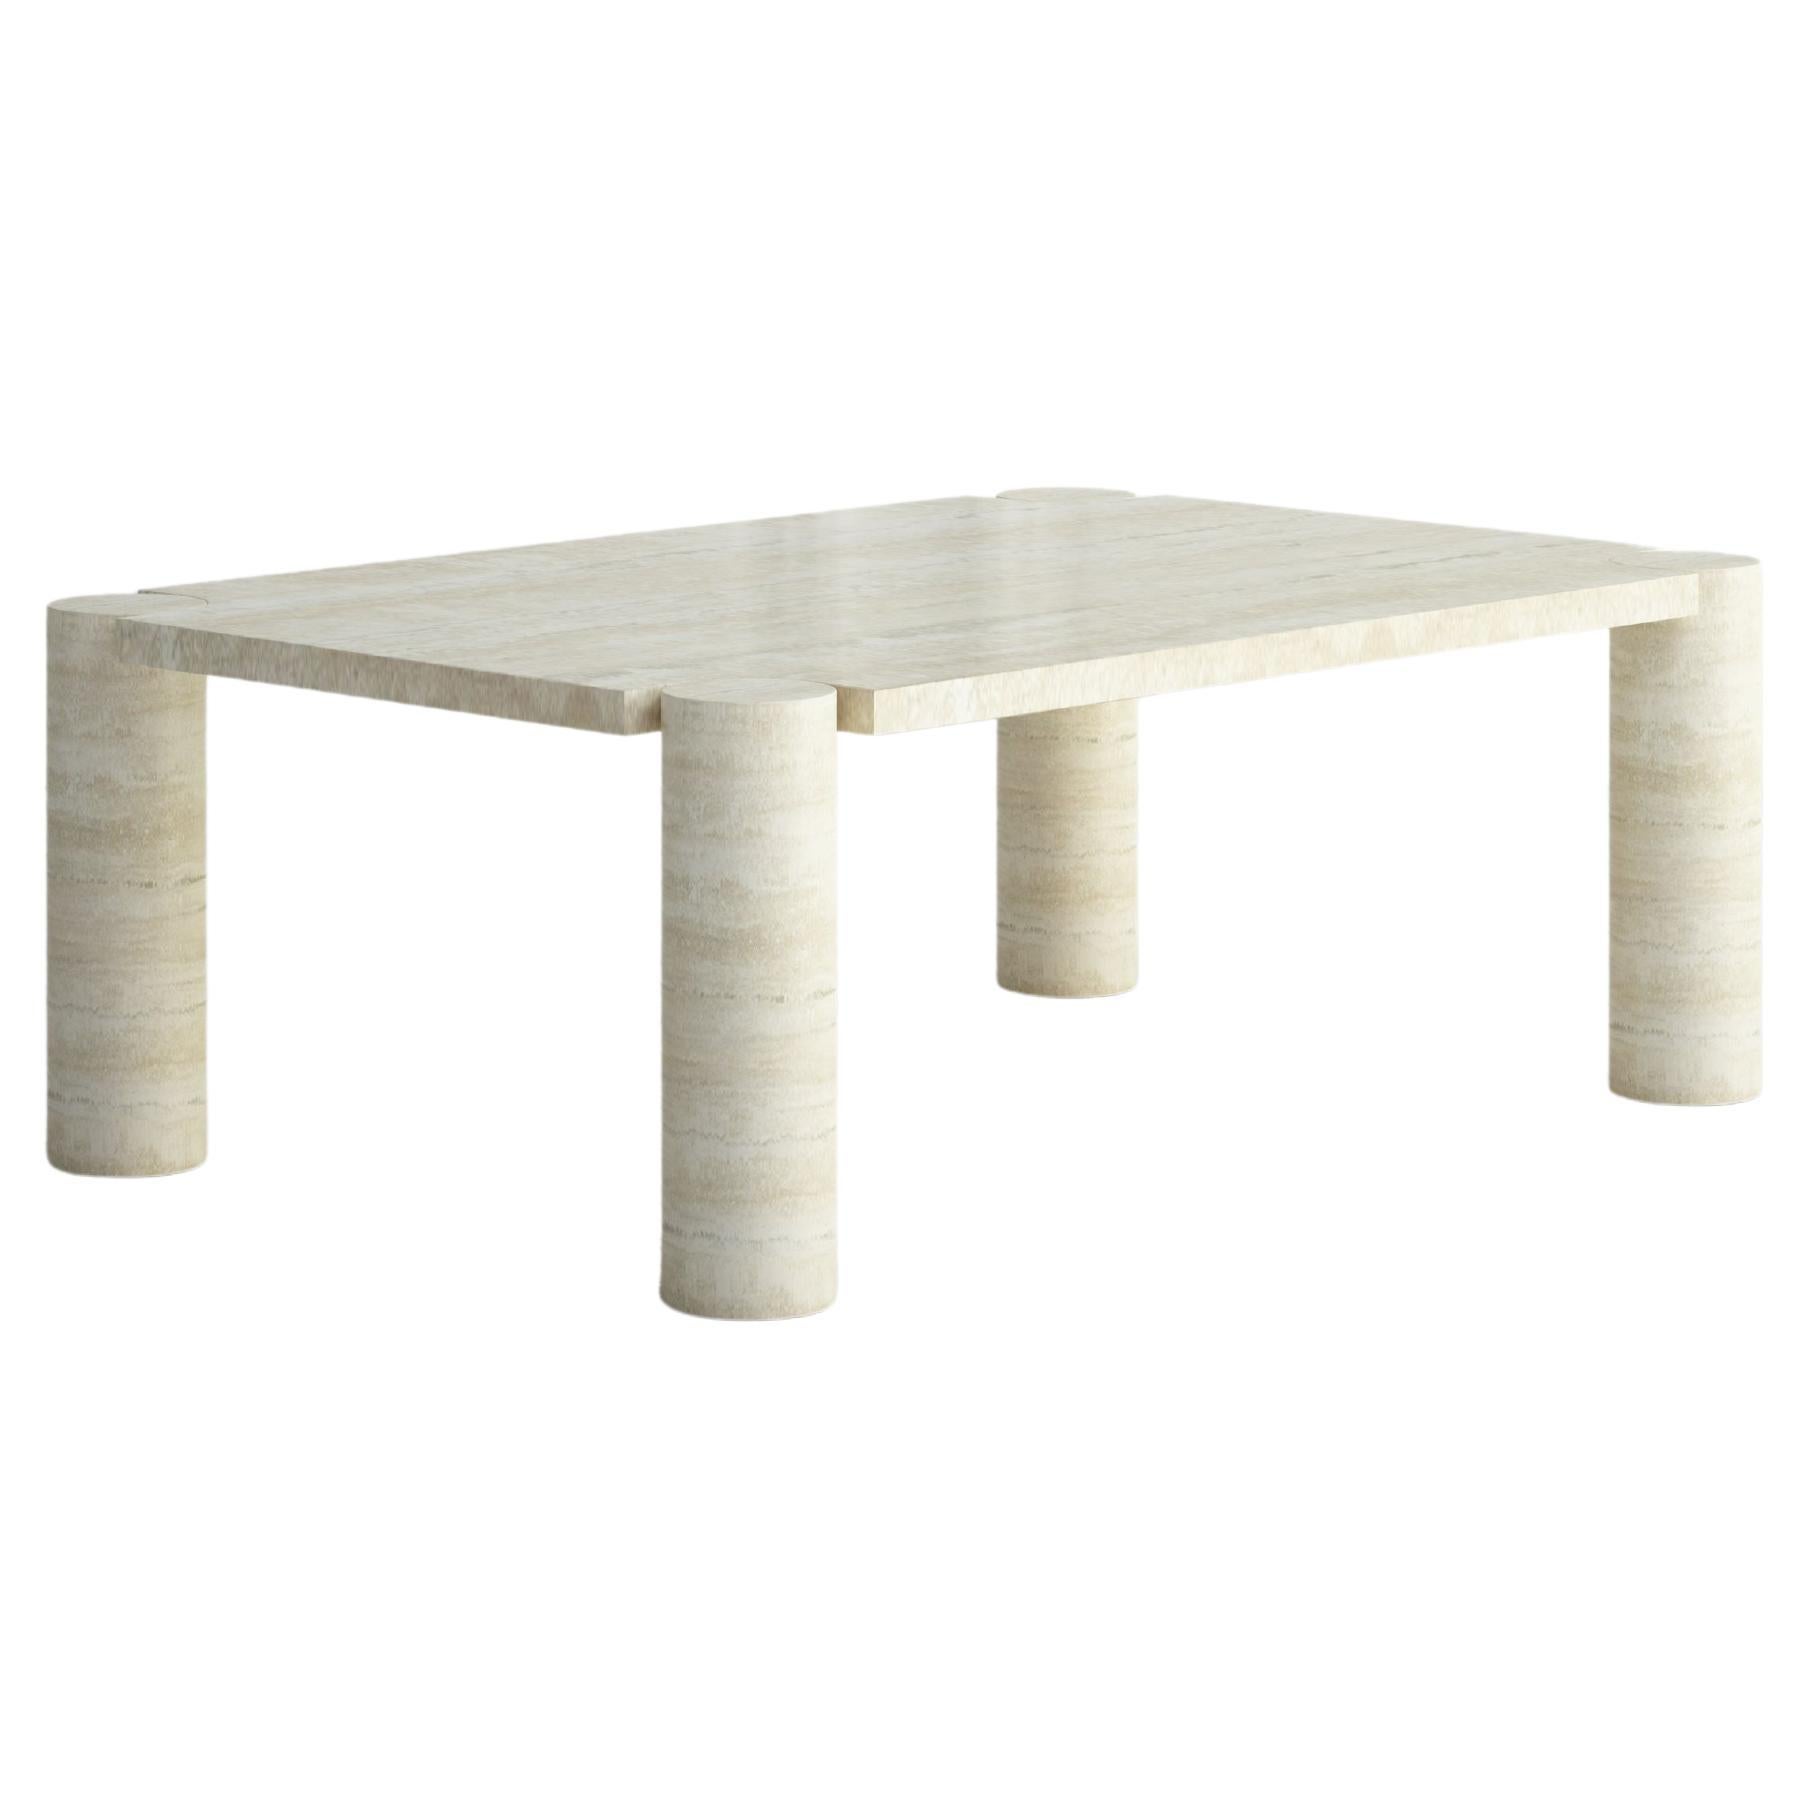 The Pauline: A Modern Stone Coffee Table with Rounded Legs For Sale